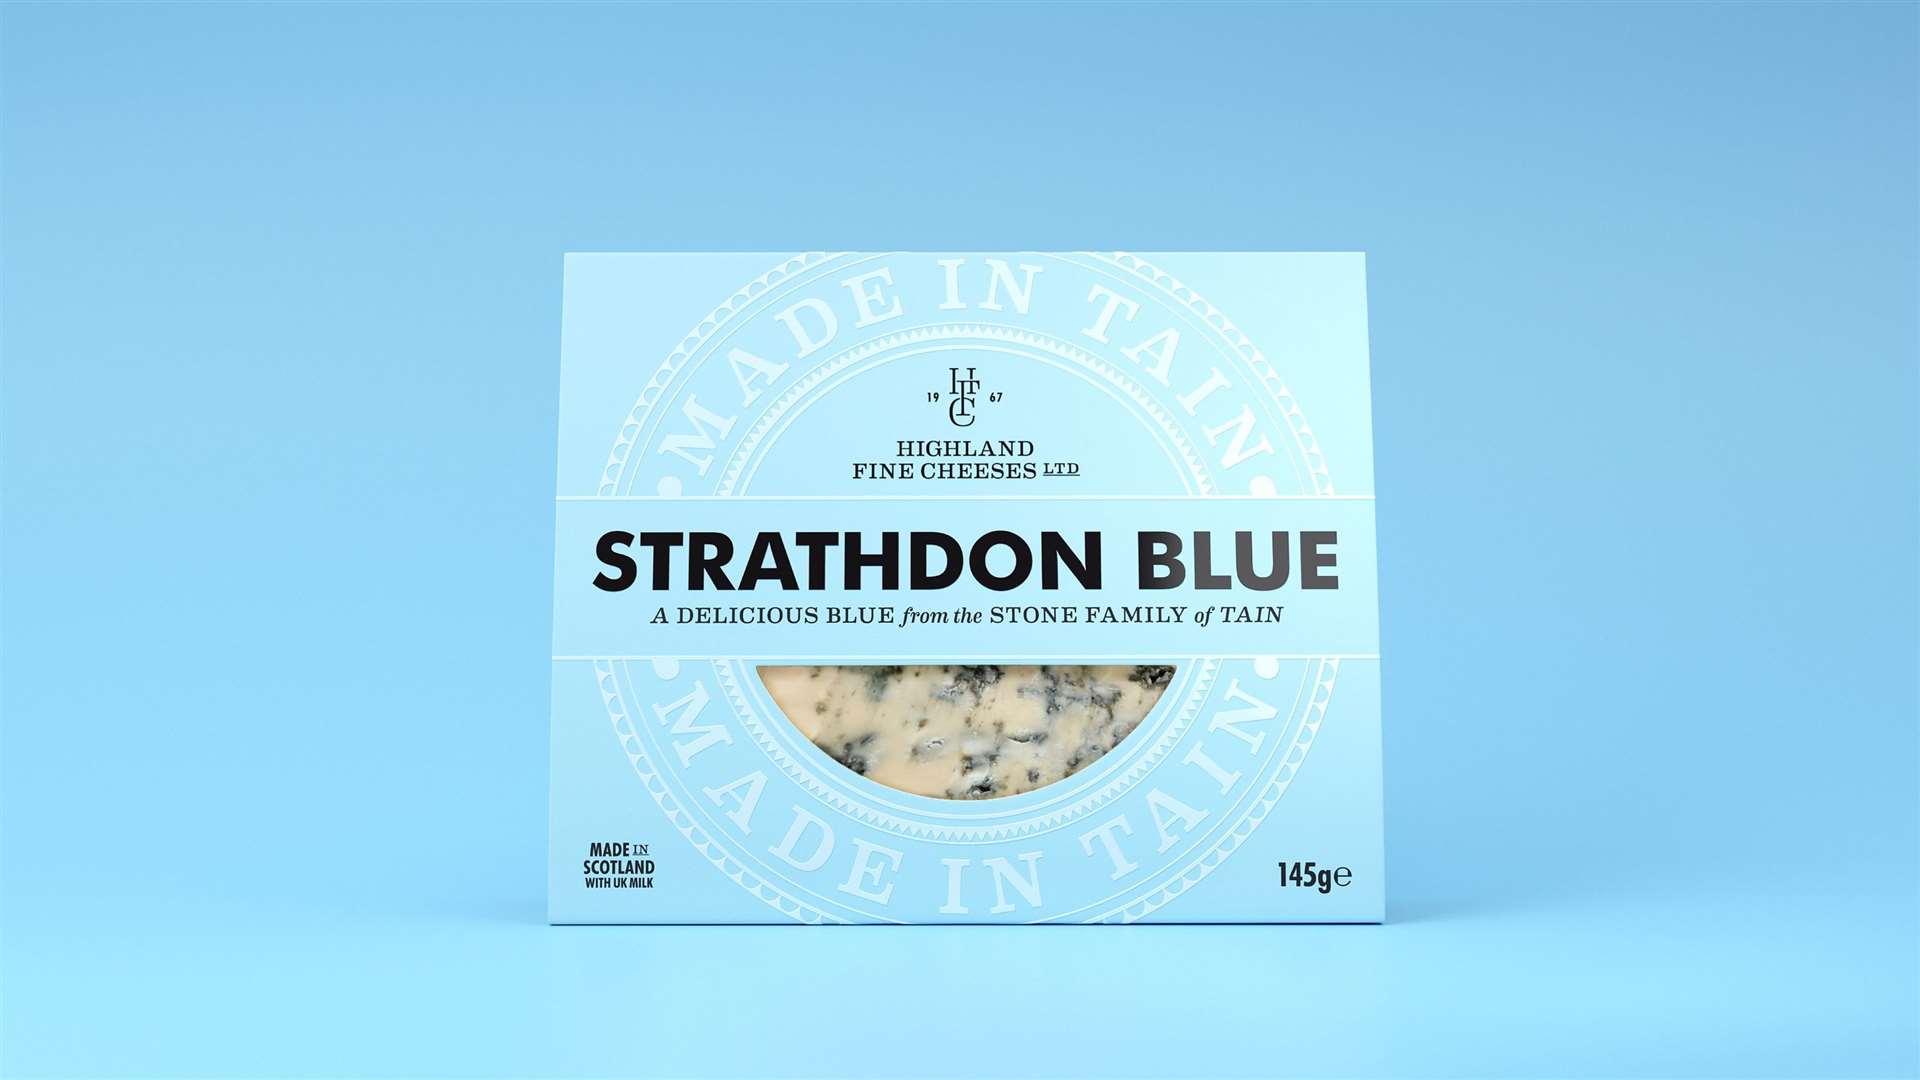 Strathdon Blue by Tain-based Highland Fine Cheeses.